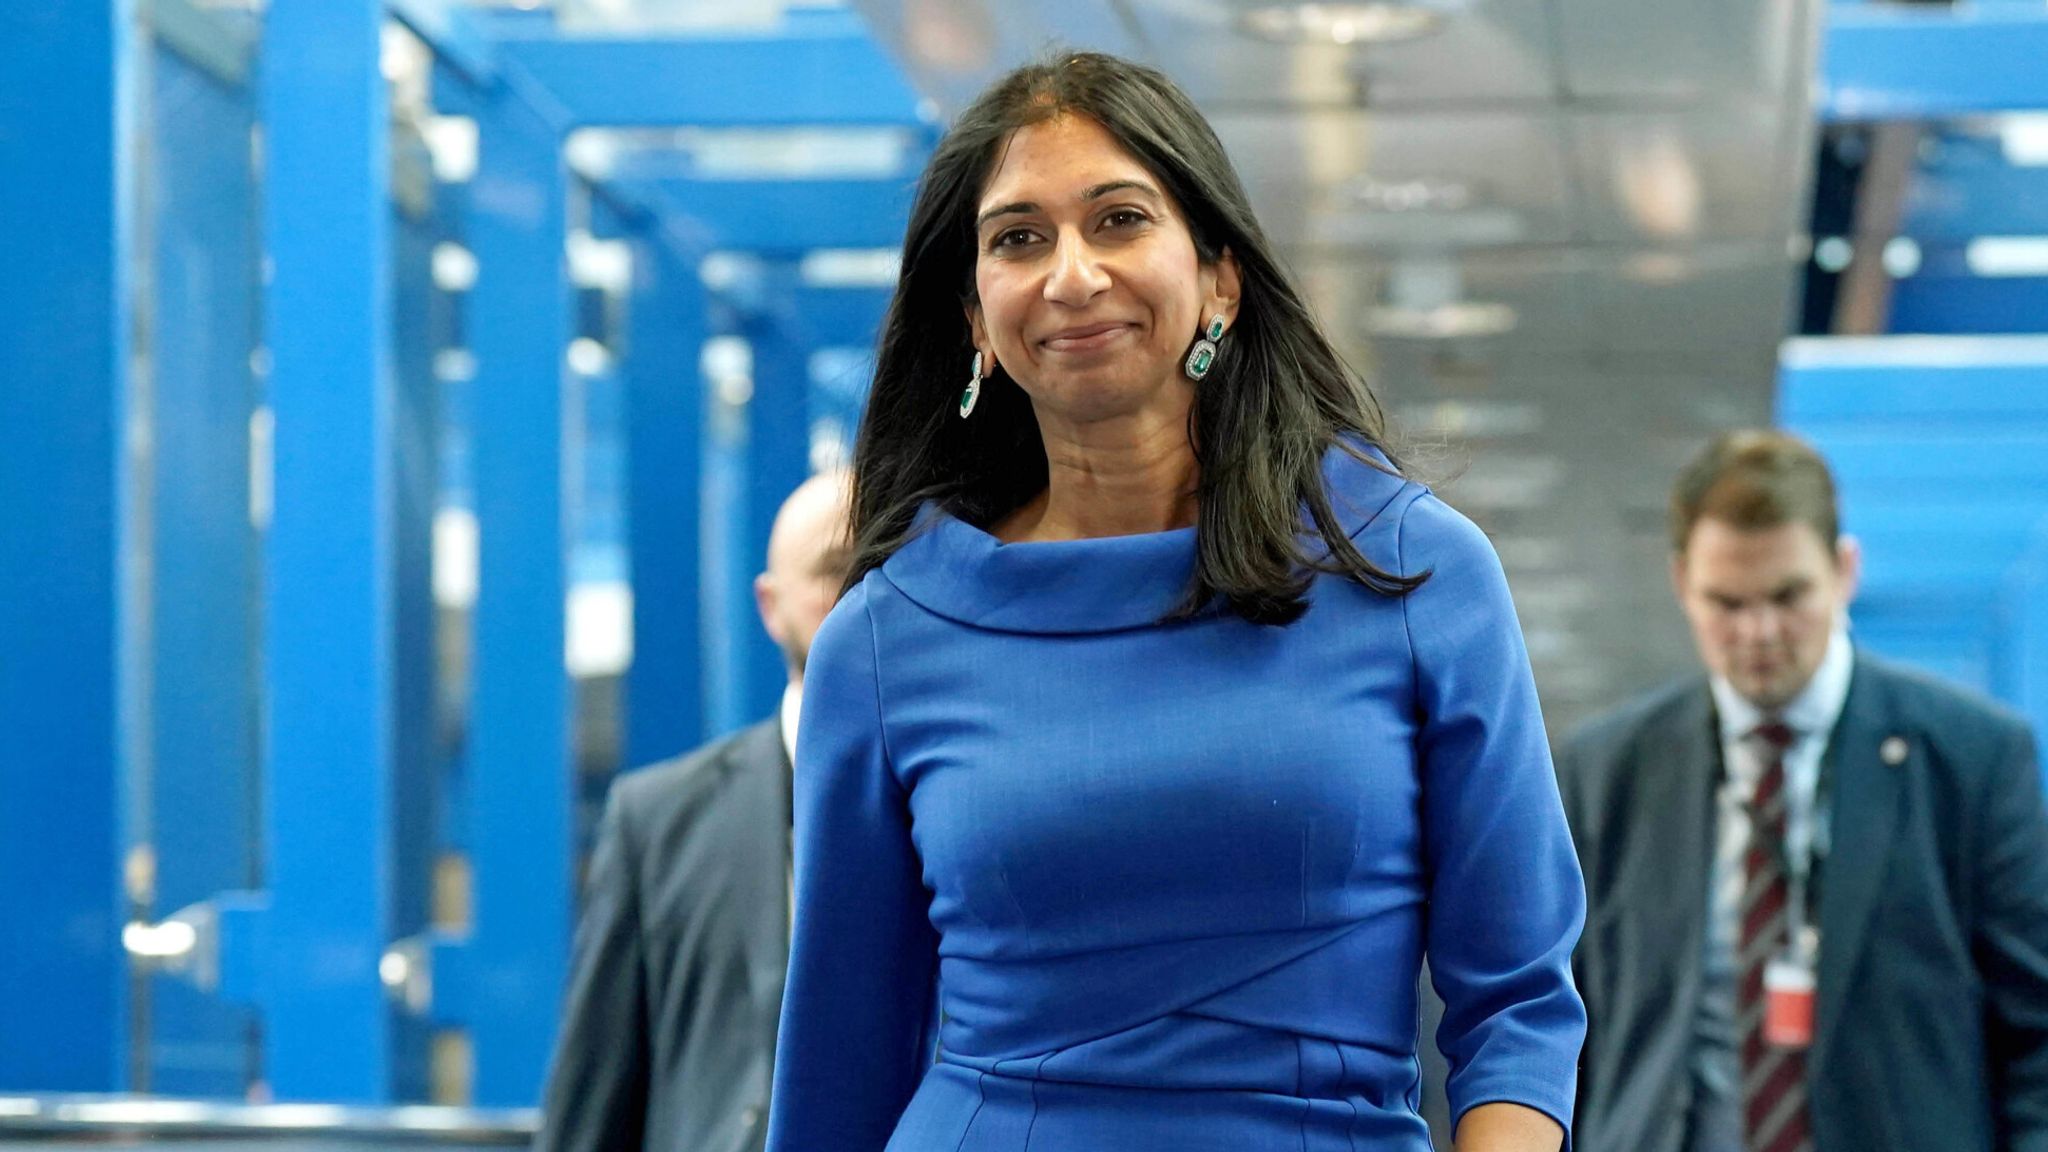 Home Secretary Suella Braverman attacks Tory MPs who 'staged coup' over 45p tax rate and 'Benefit Street culture' in Britain | Politics News | Sky News